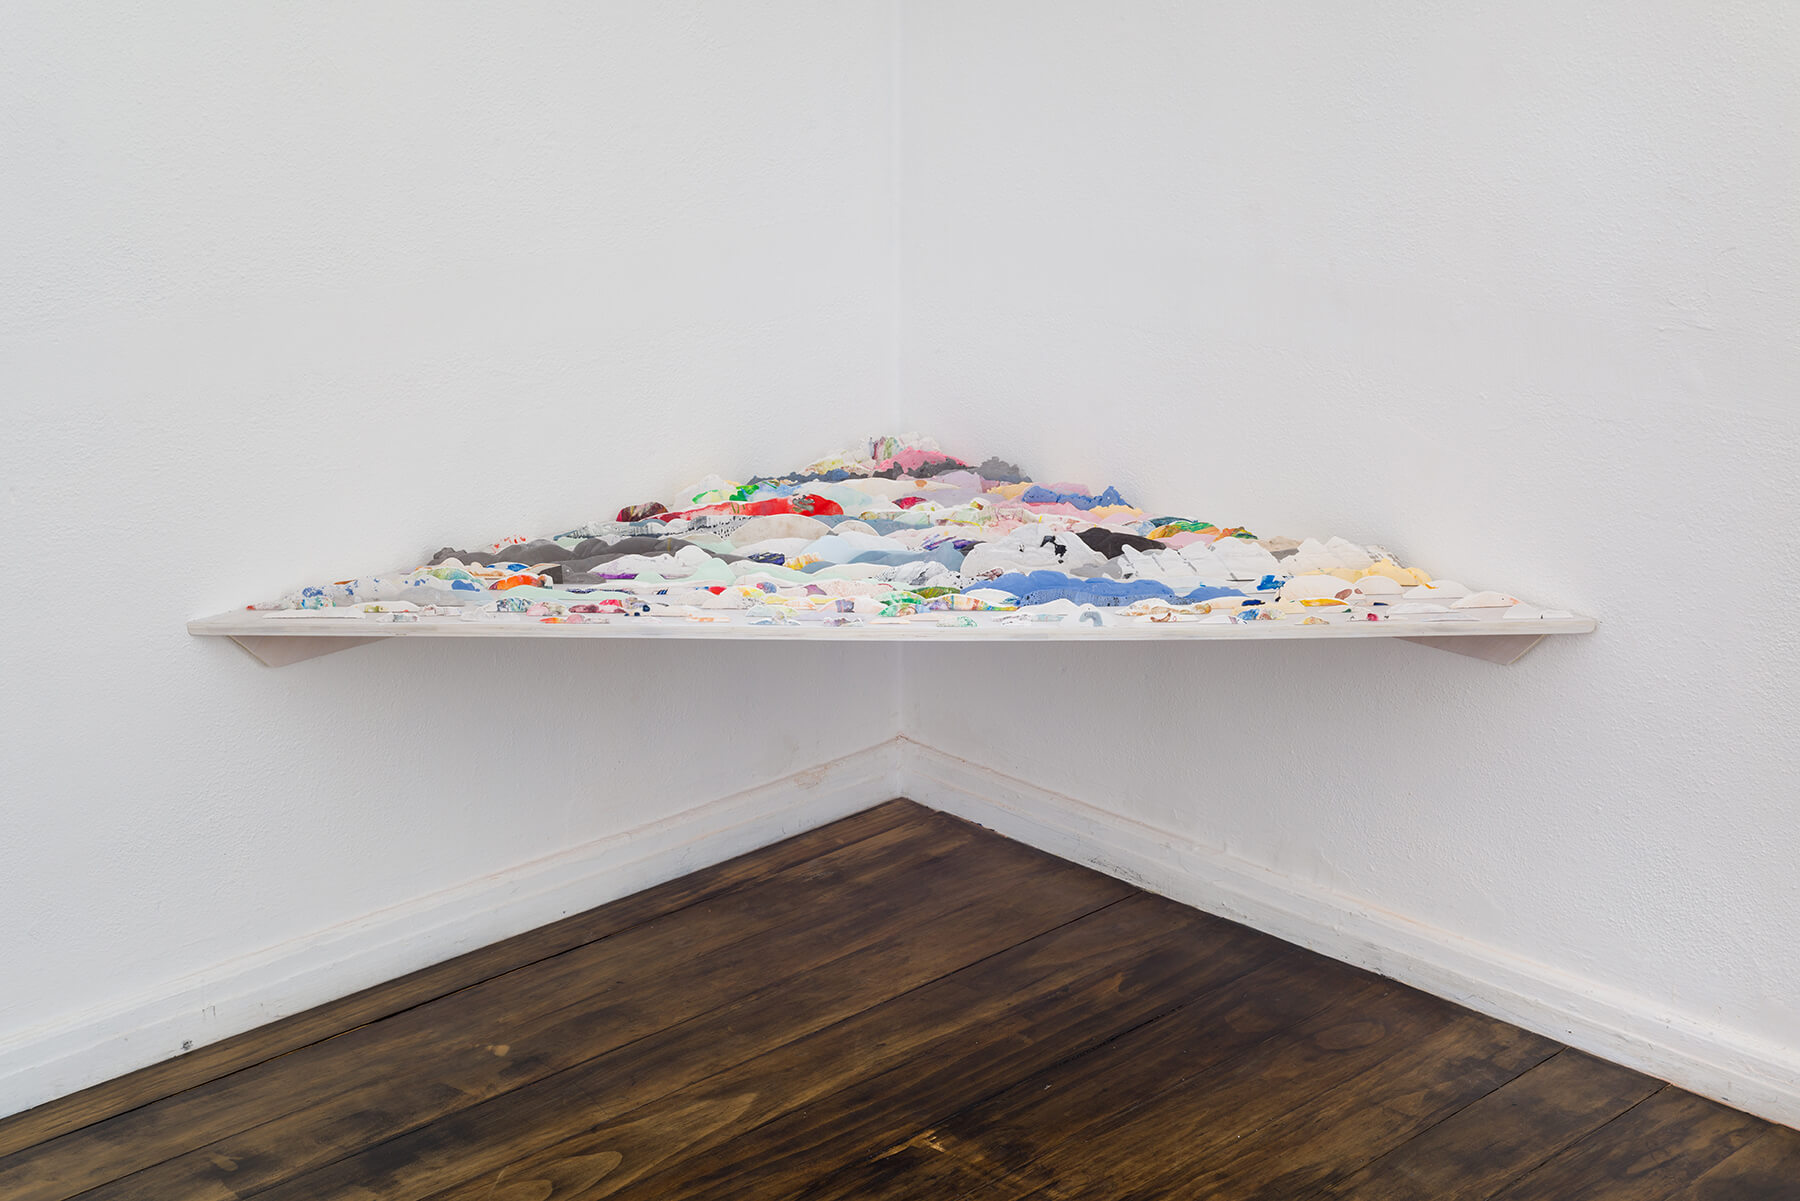 Soughing Pulchritude, Hydrocal plaster, pigment, Hydrocal plaster, pigment, 4 ft x 5.5 ft x 1 in, 2015